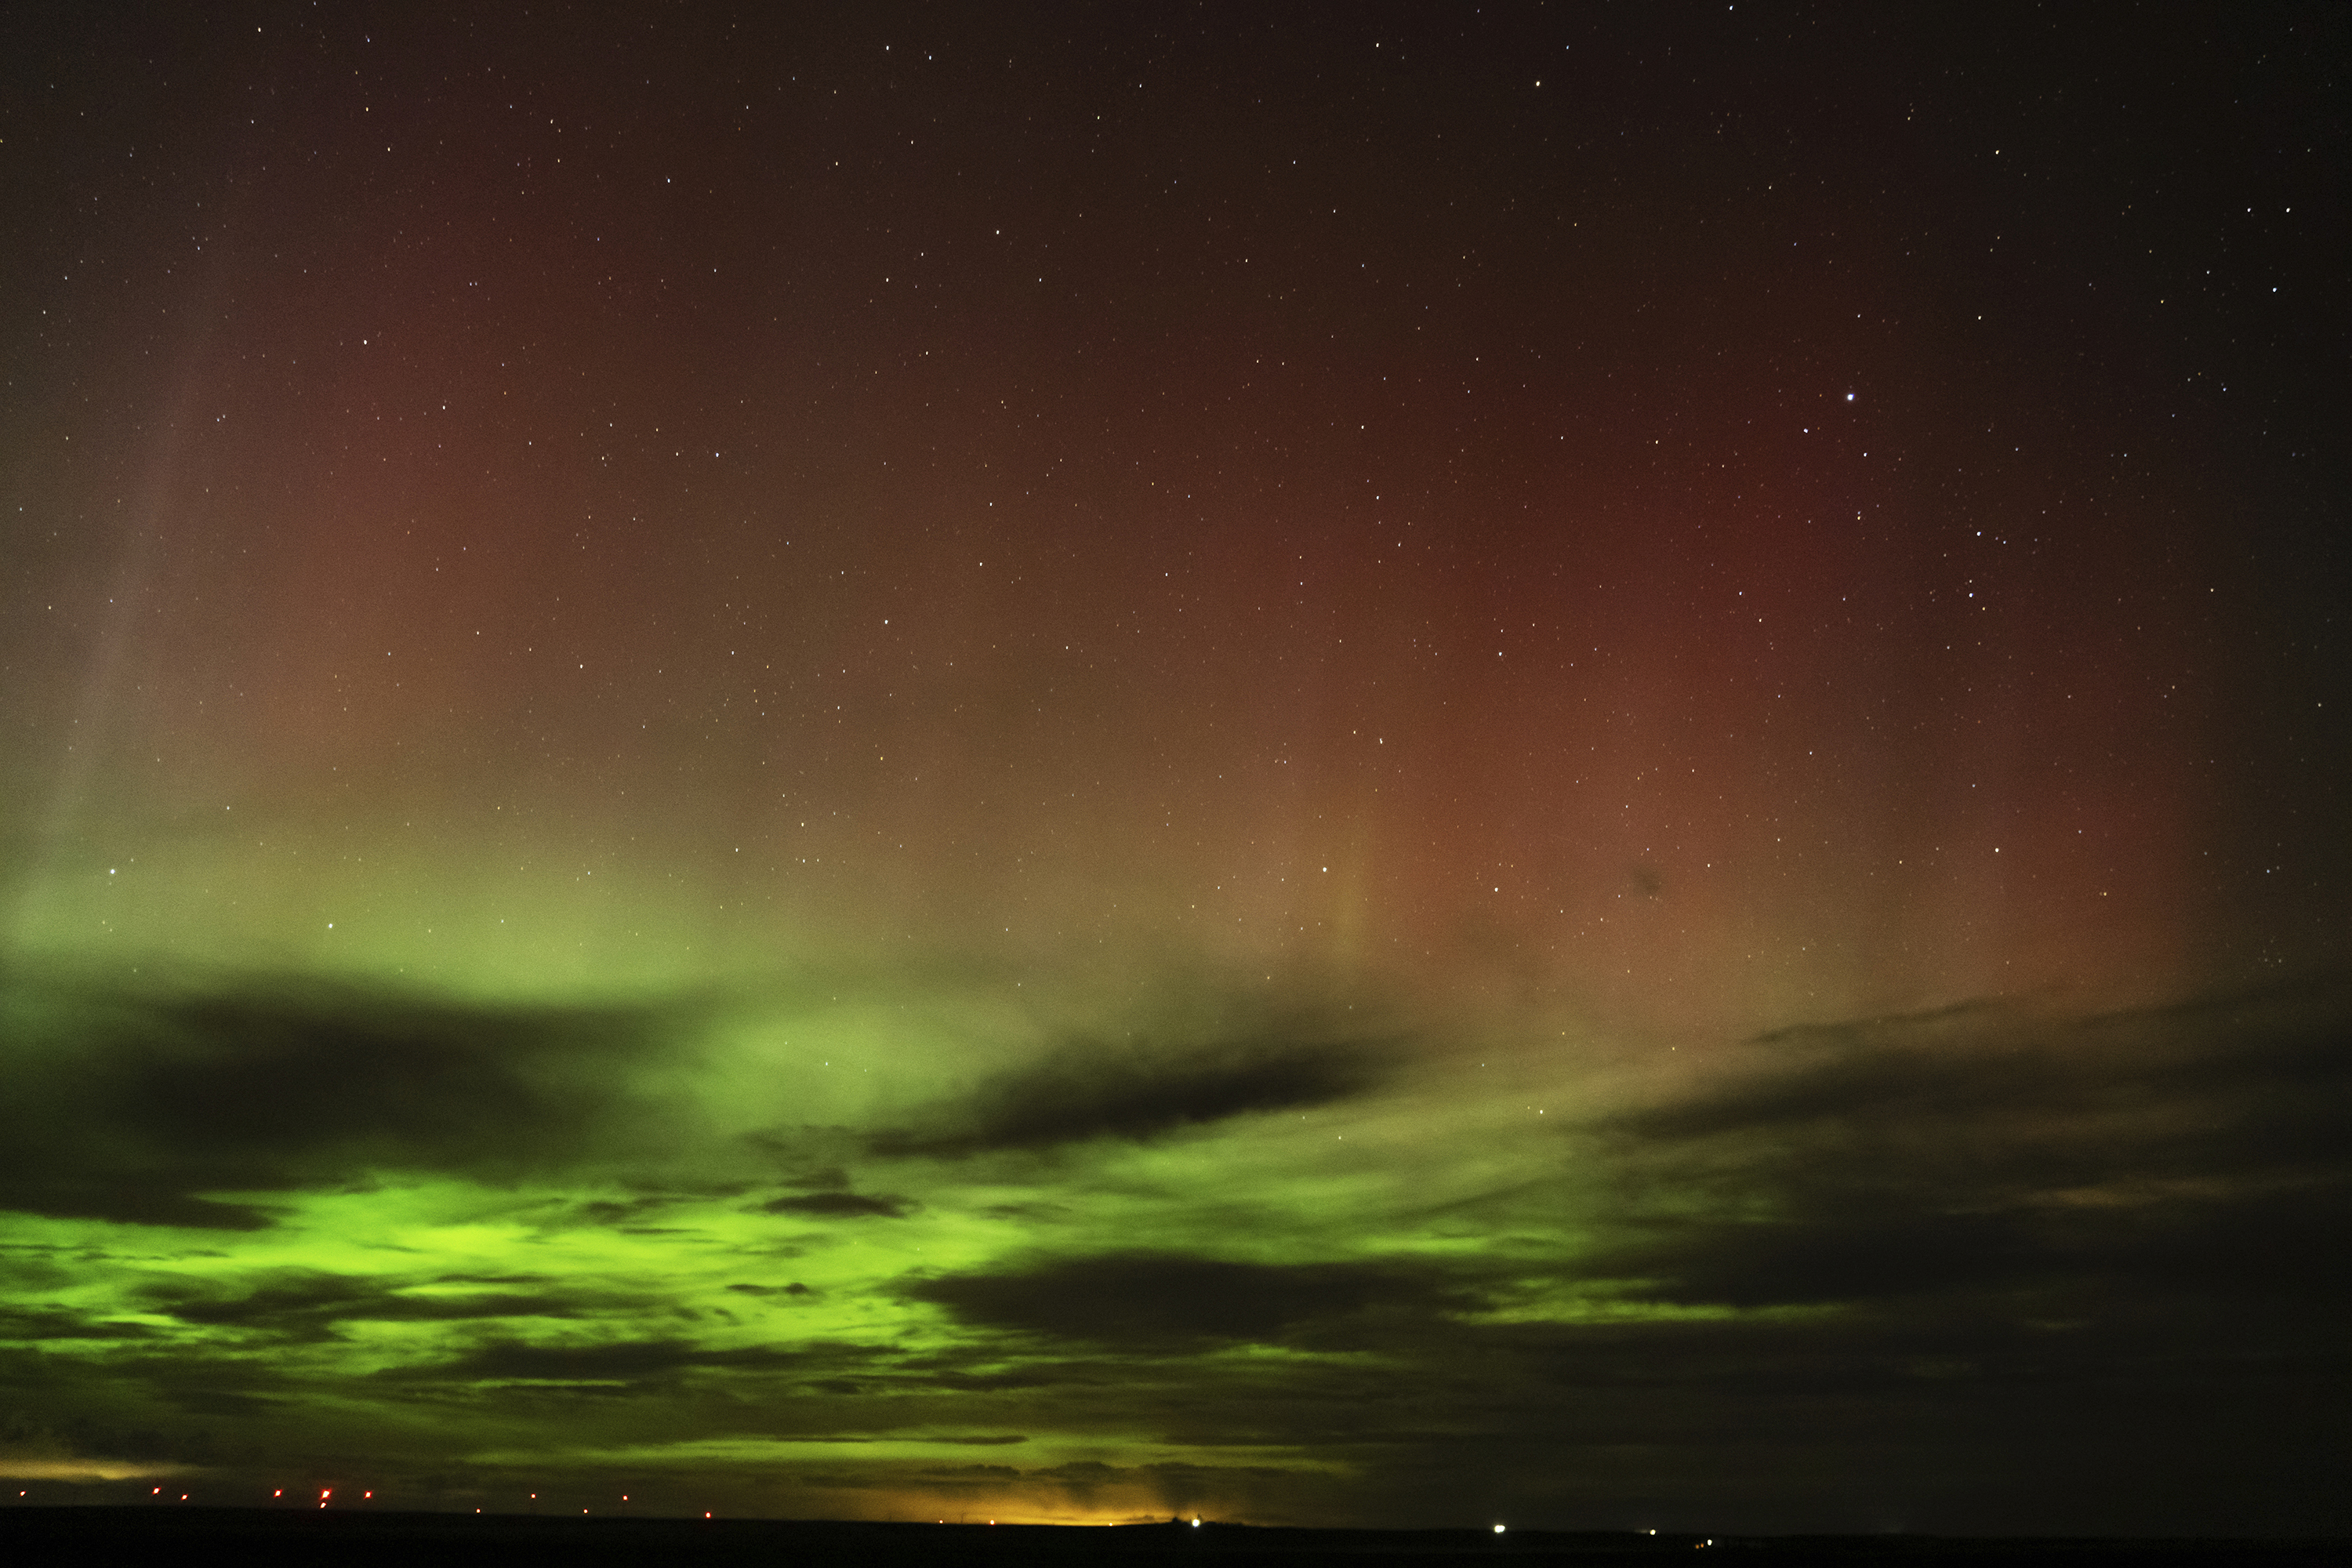 Solar storm expected to make Northern Lights visible in 17 states